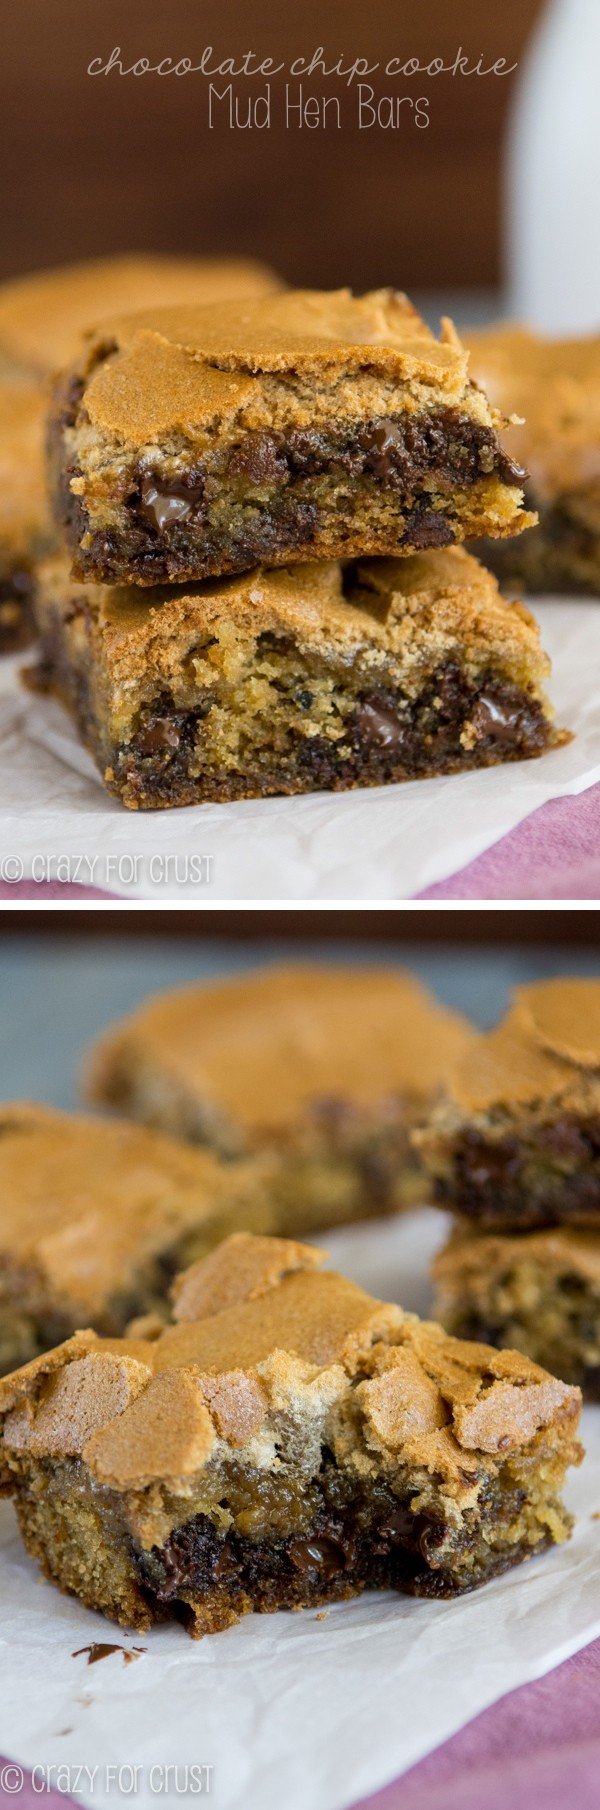 Chocolate Chip Cookie Mud Hen Bars - melty chocolate chip cookie topped with a brown sugar meringue collage